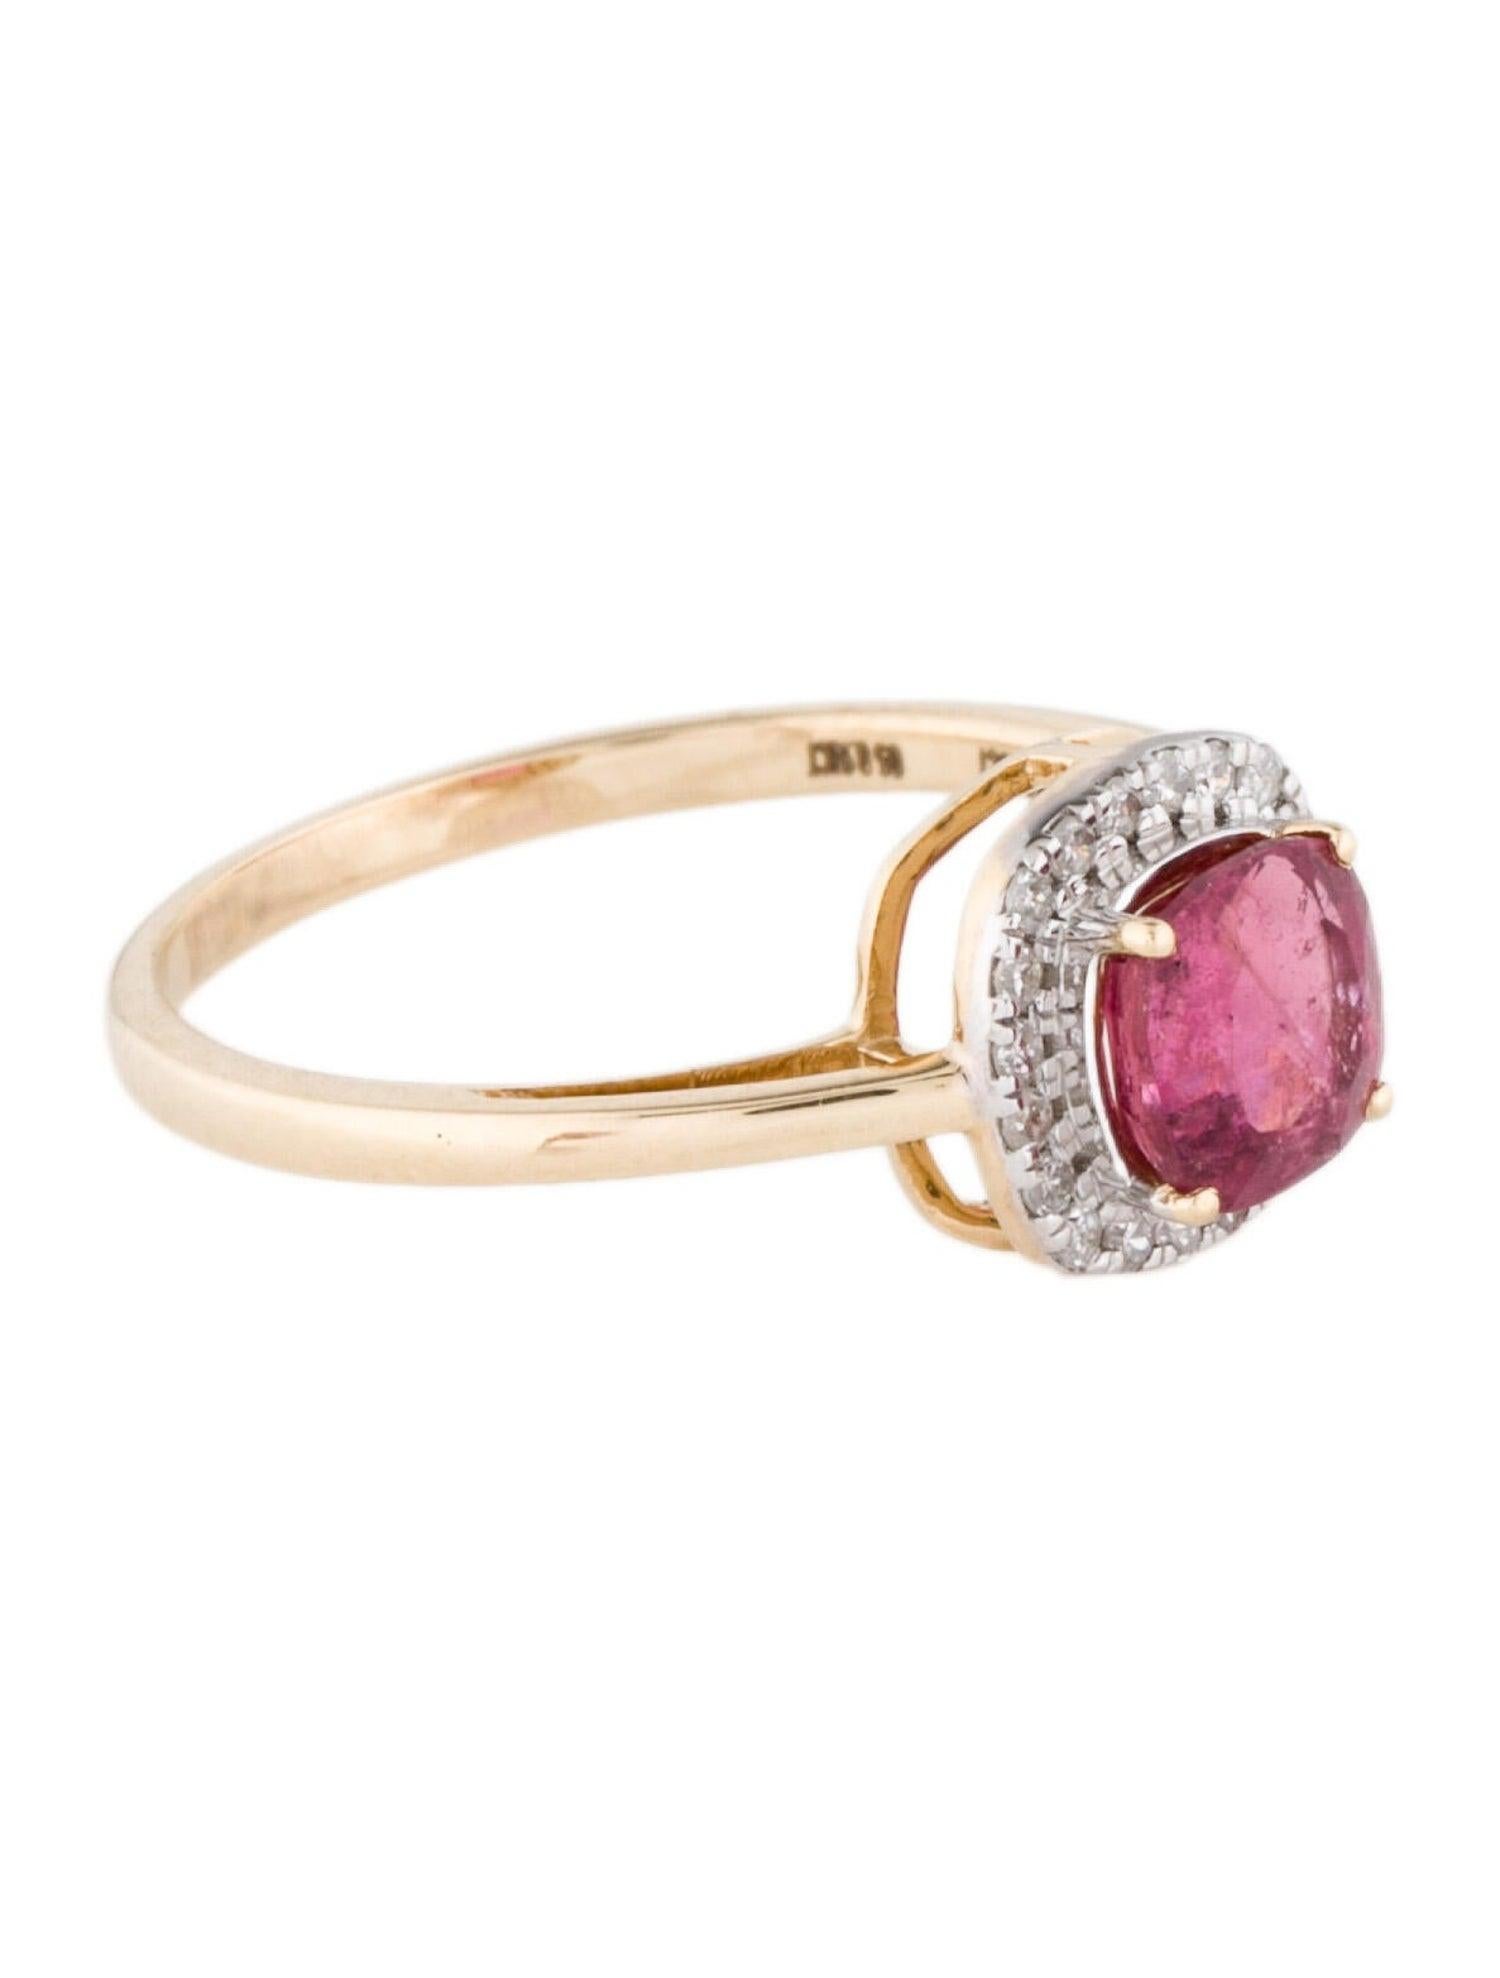 Embrace the exquisite allure of 'Rose Radiance,' a masterpiece from our Vibrant Pink Treasures collection. This captivating ring showcases a Rubellite gemstone, reminiscent of the depths of the sea and the vivid bloom of a rose.

Crafted with